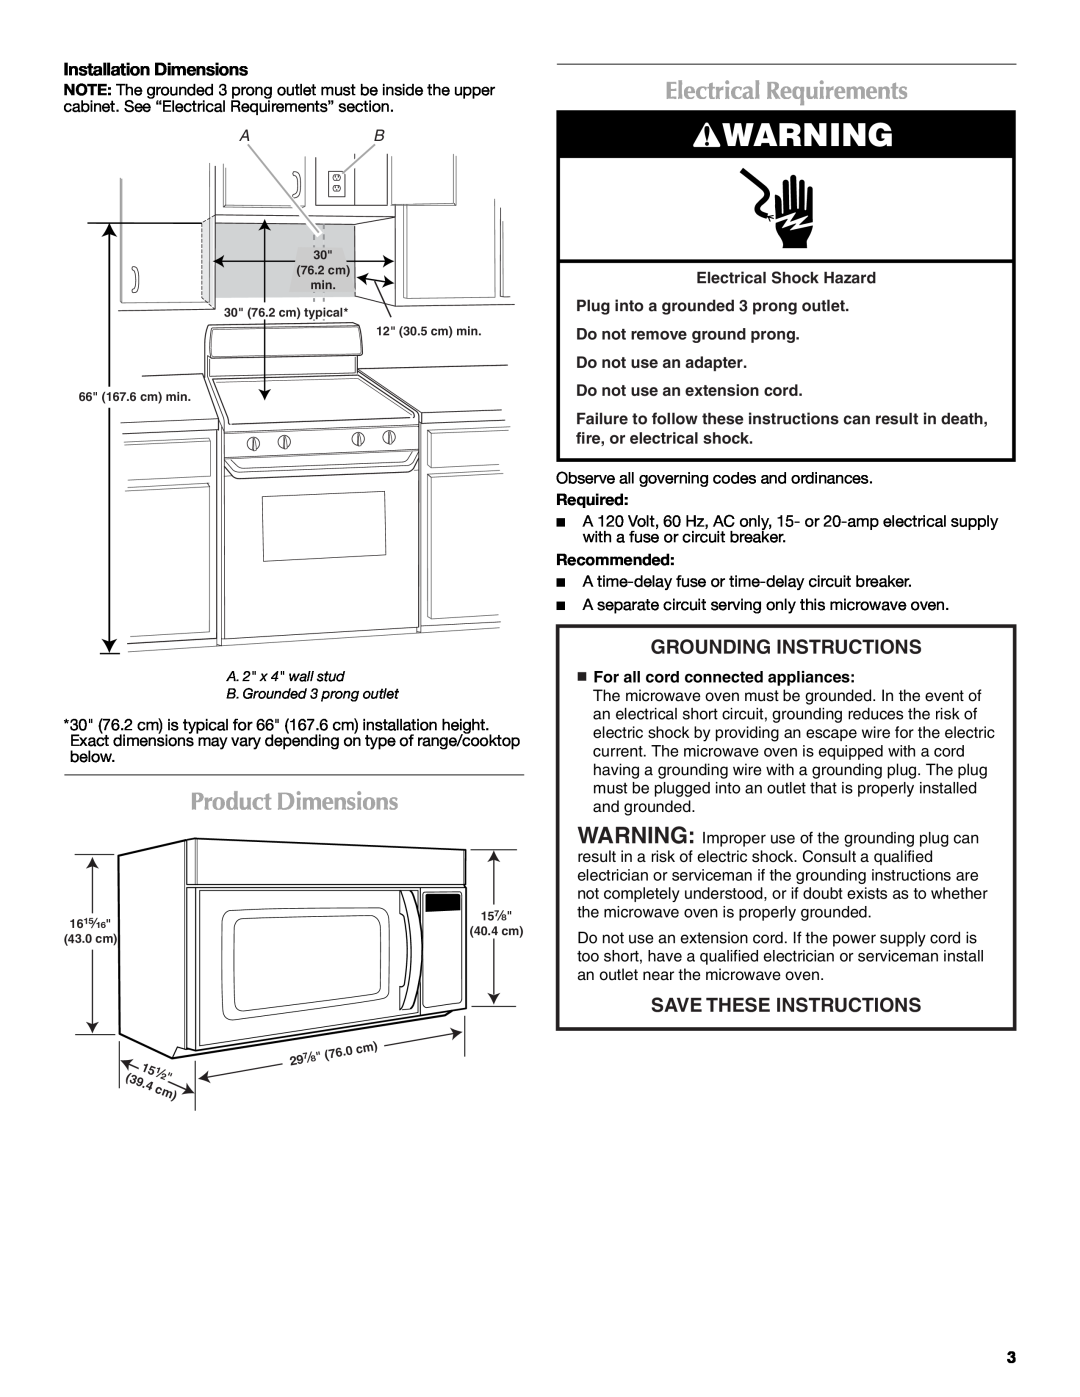 Maytag W10188947A Product Dimensions, Electrical Requirements, Installation Dimensions, Do not use an extension cord 